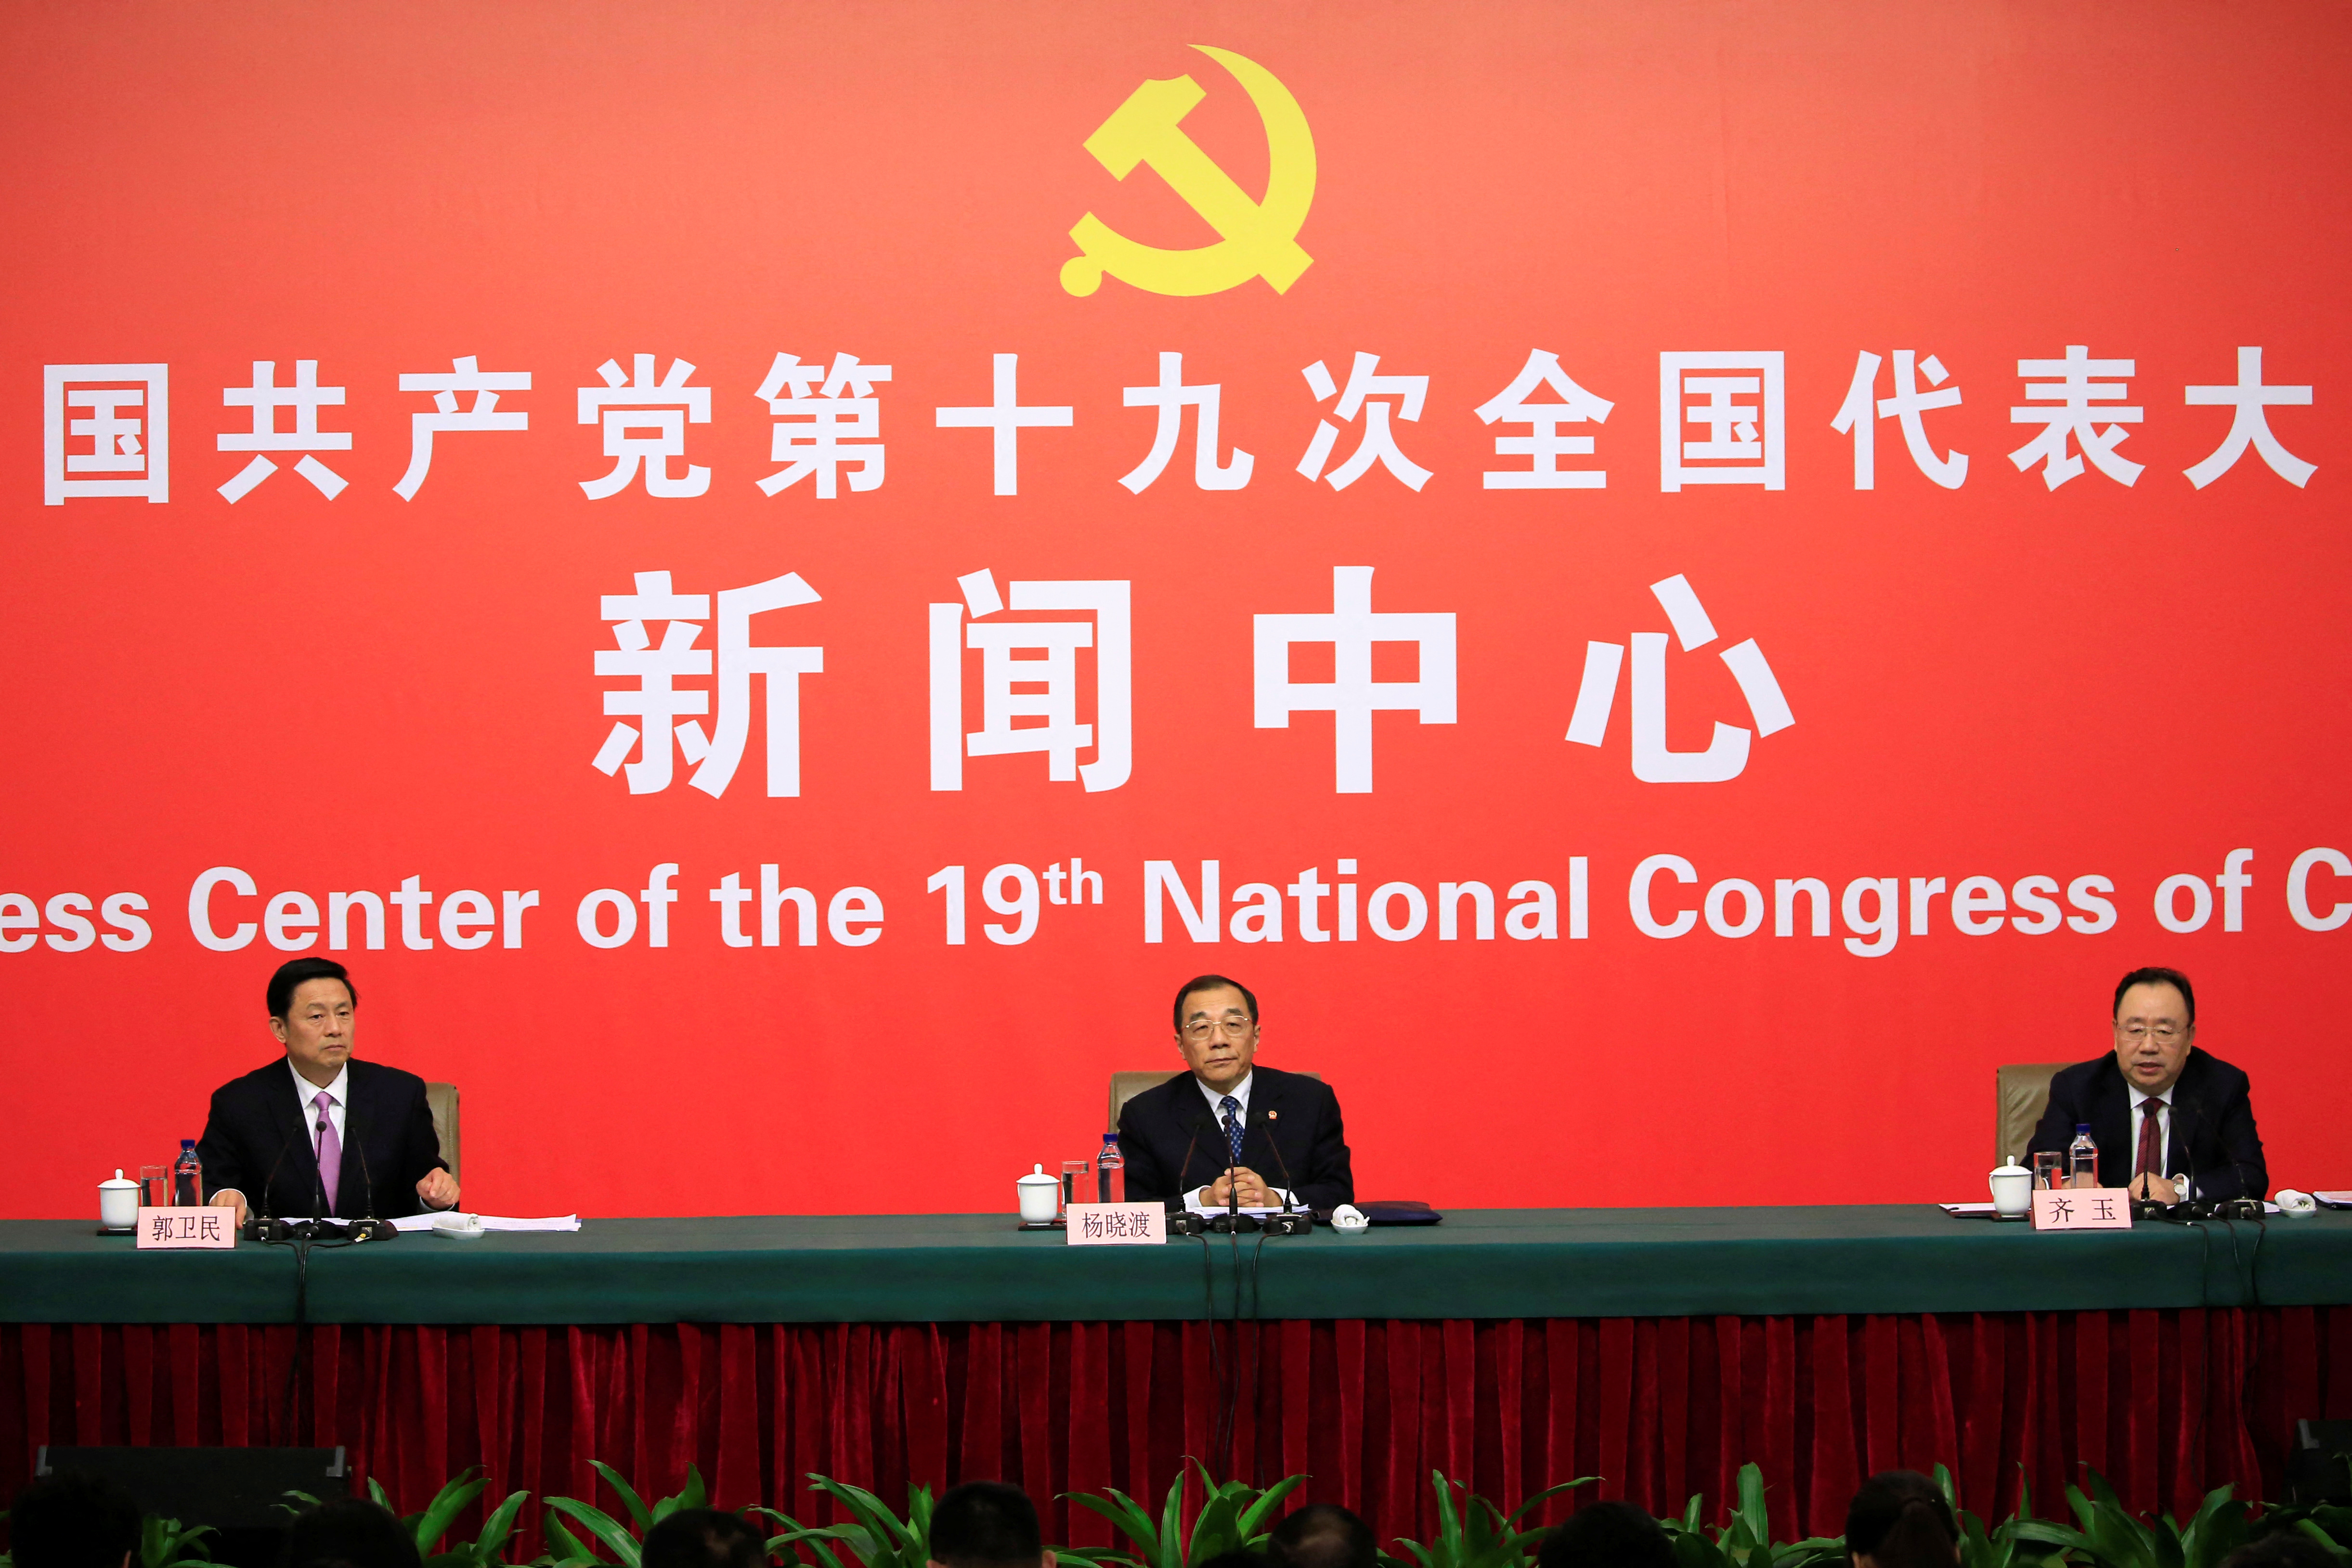 China's Minister of Supervision, and Chief of the National Bureau of Corruption Prevention, Yang Xiaodu attends a news conference during the 19th National Congress of the Communist Party of China in Beijing